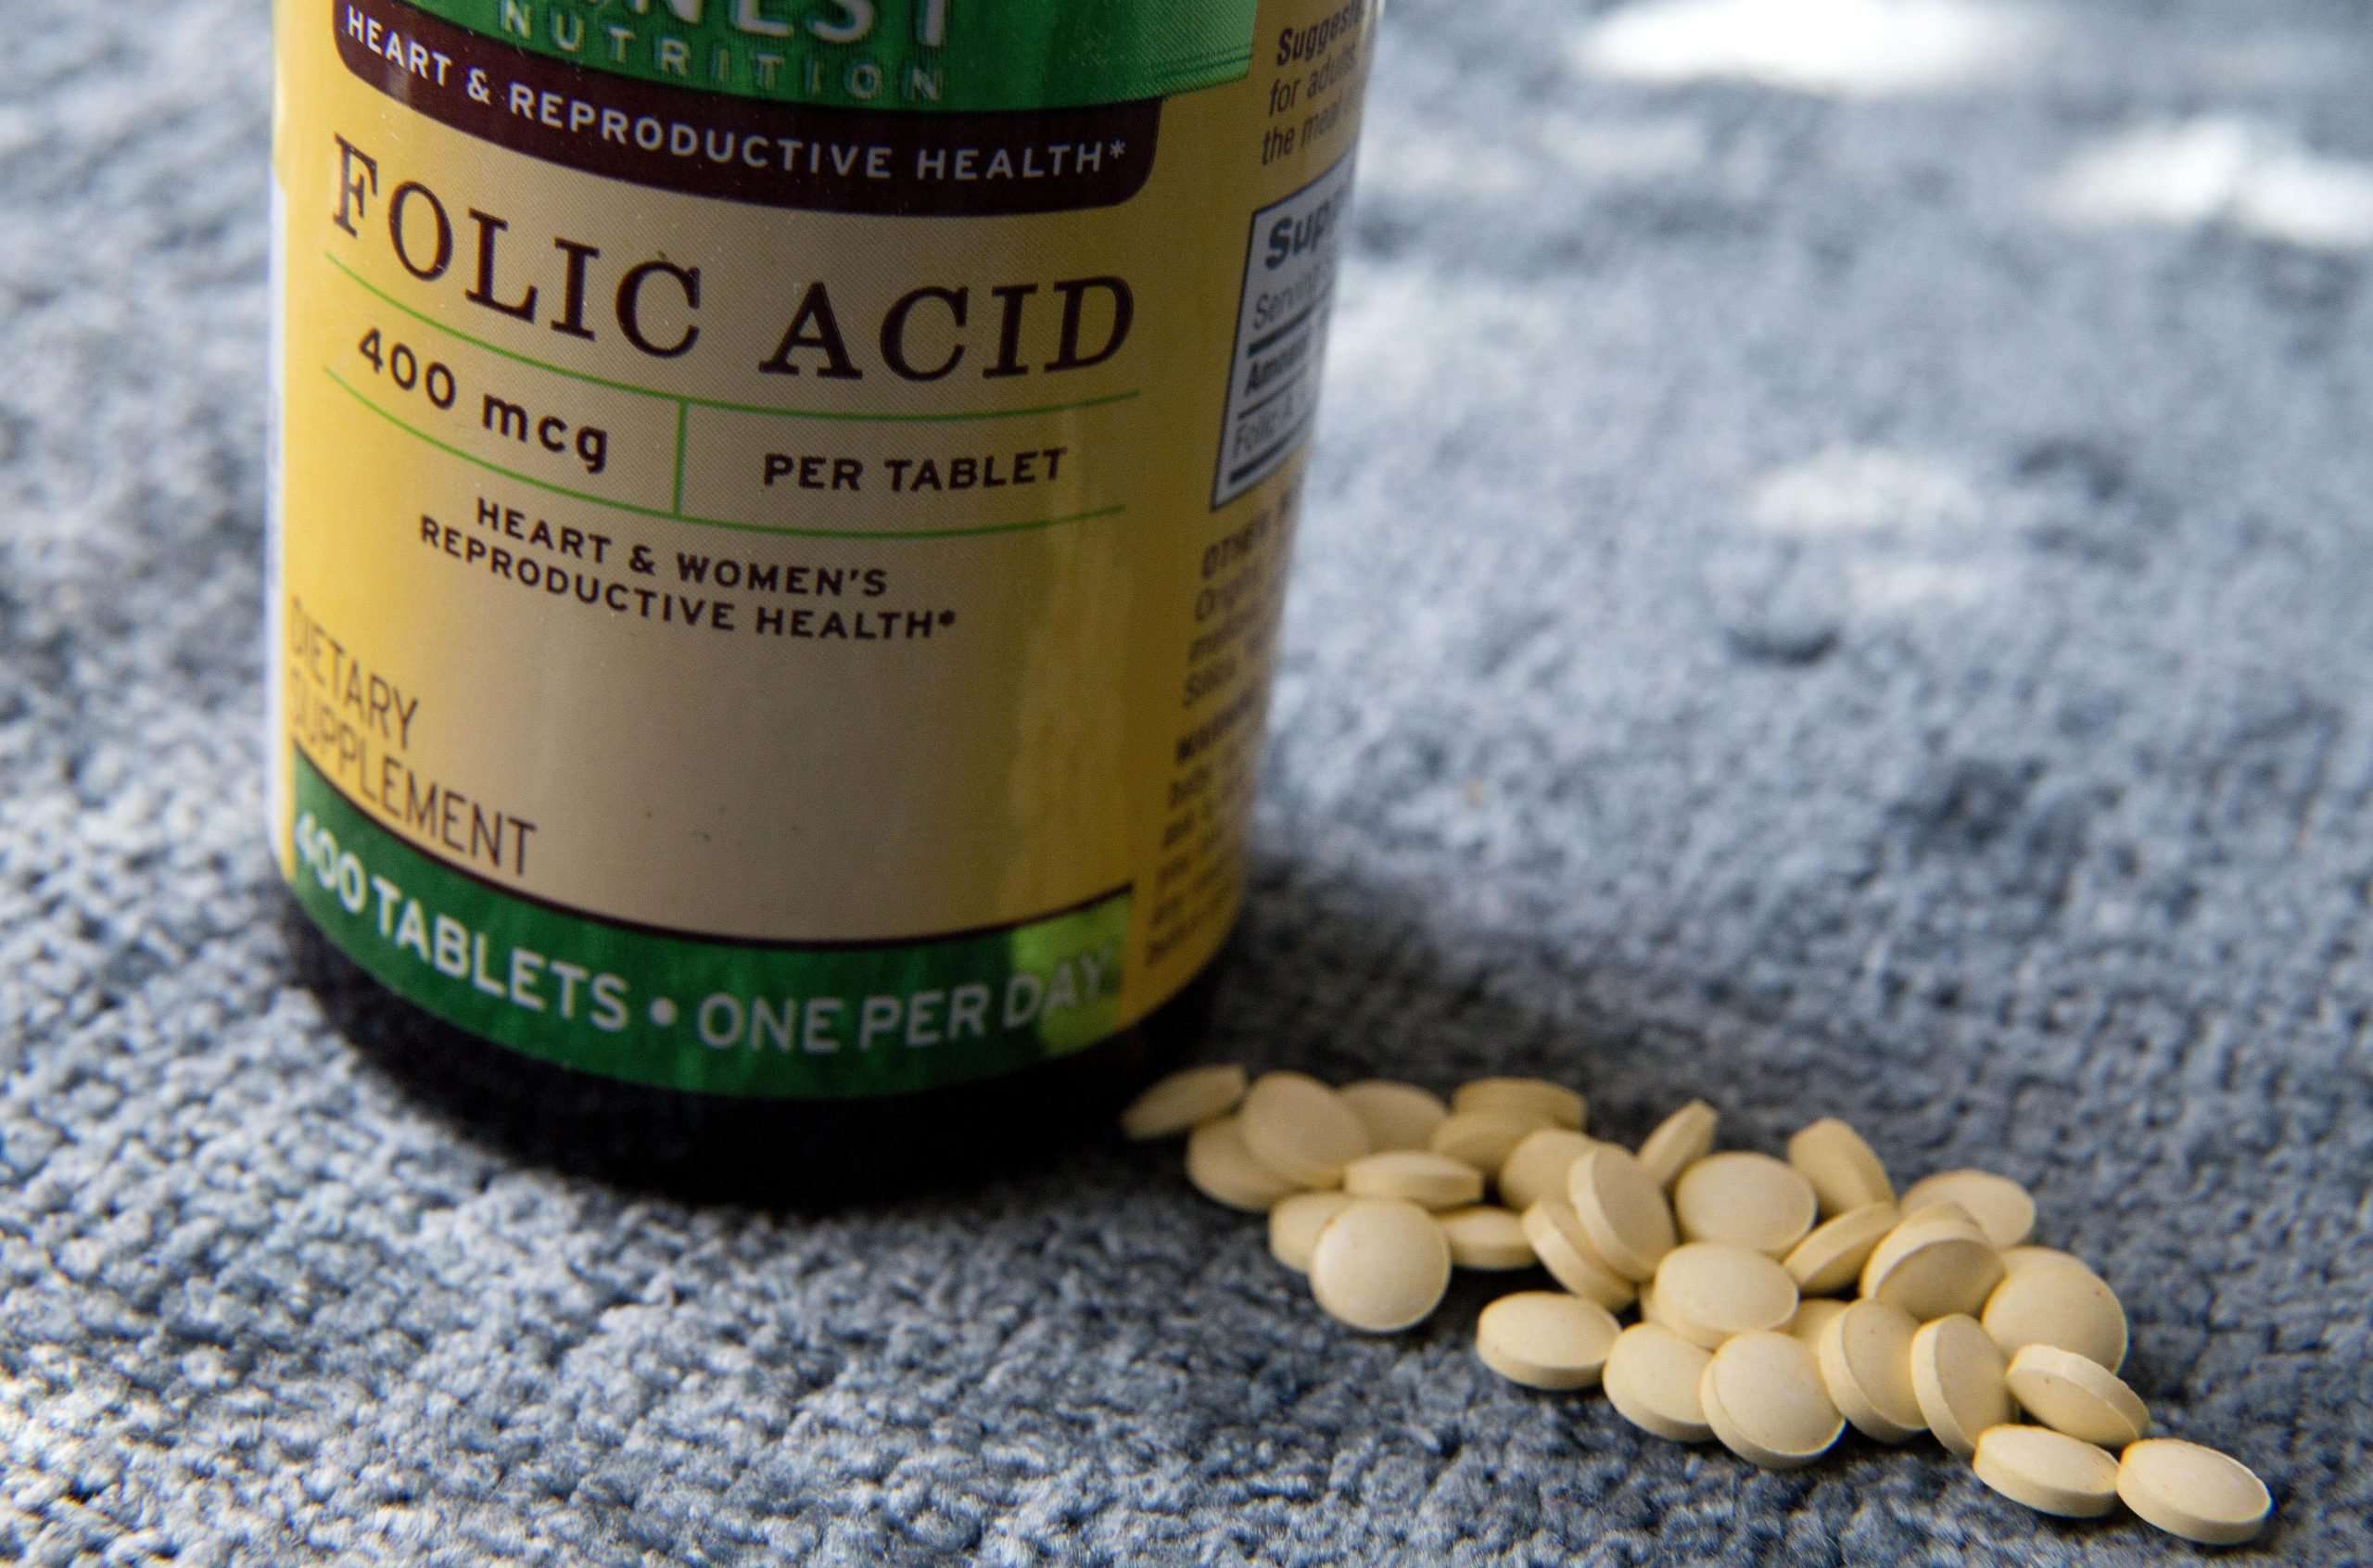 Study asks: Too much folic acid a cause of autism?